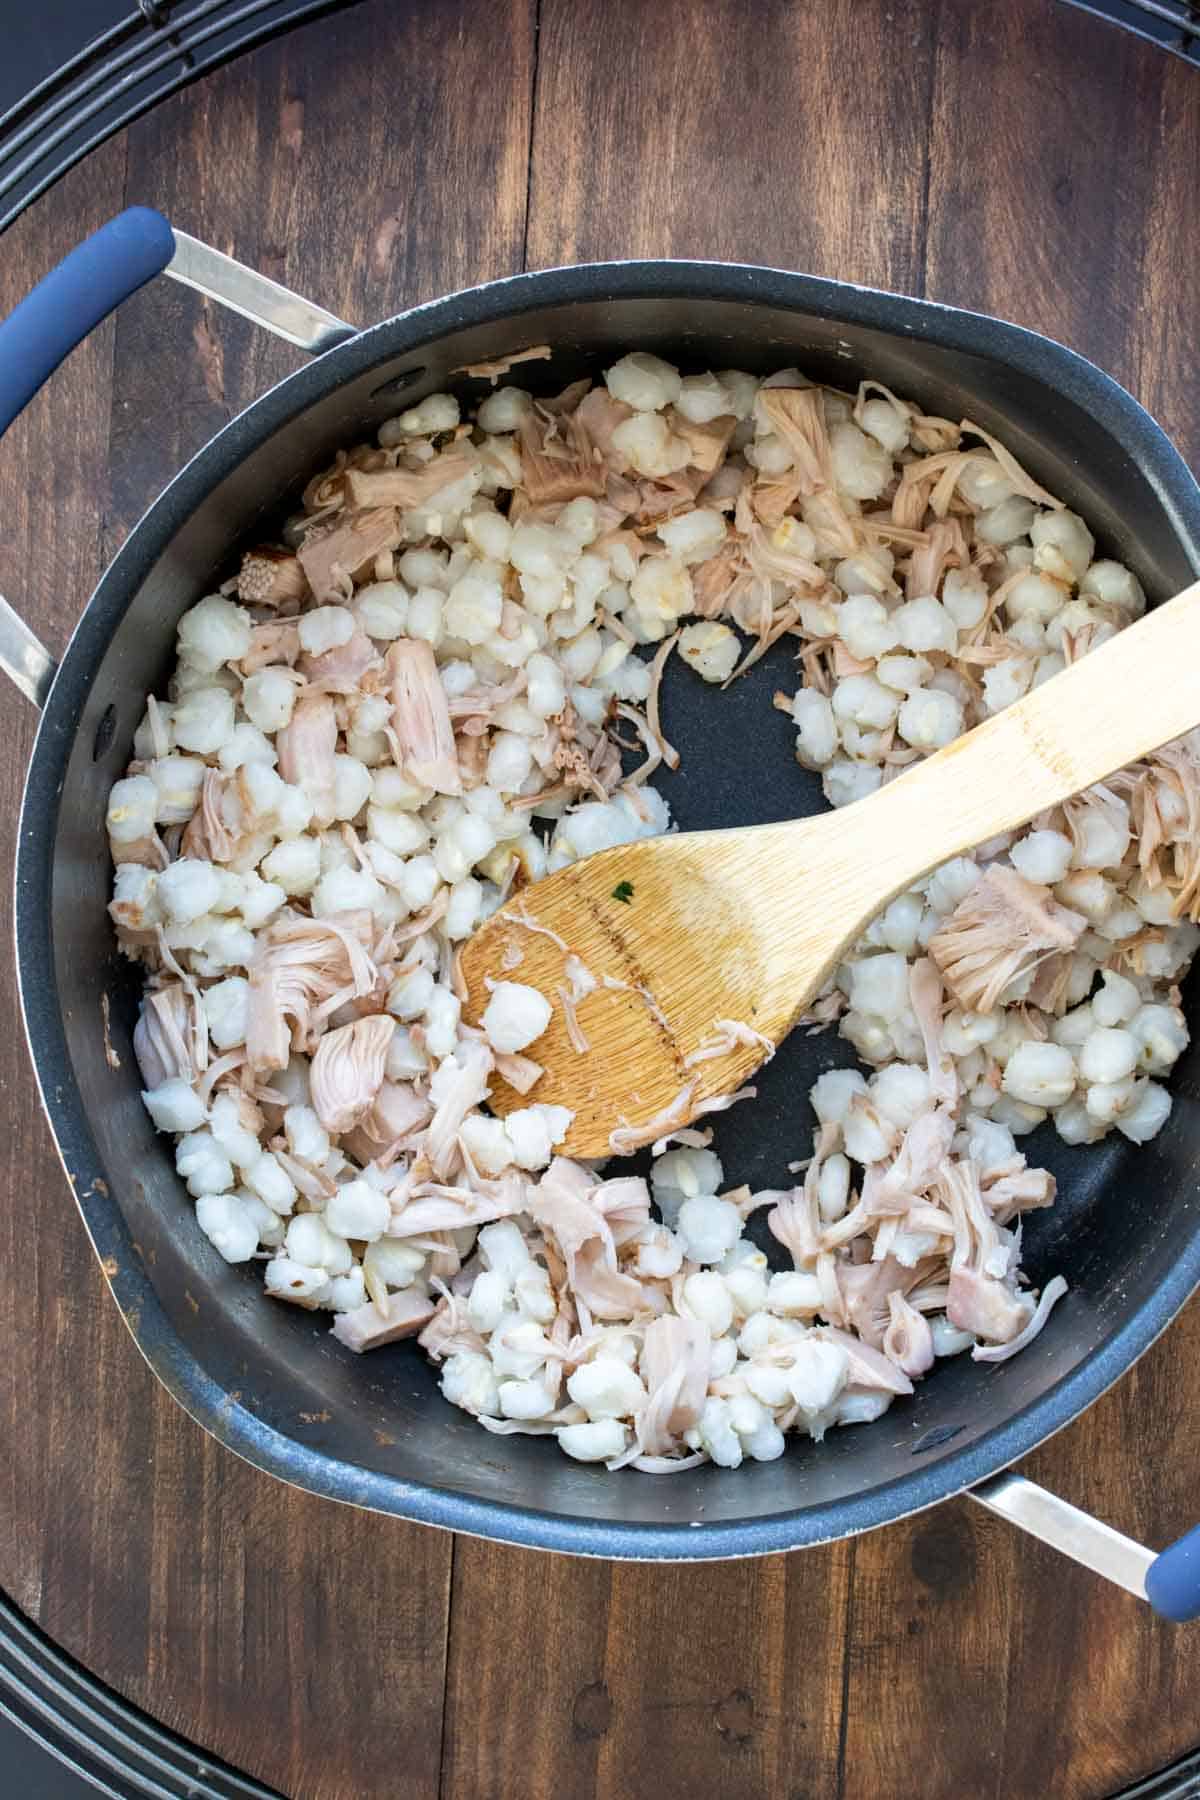 Wooden spoon mixing jackfruit and hominy in a pot.